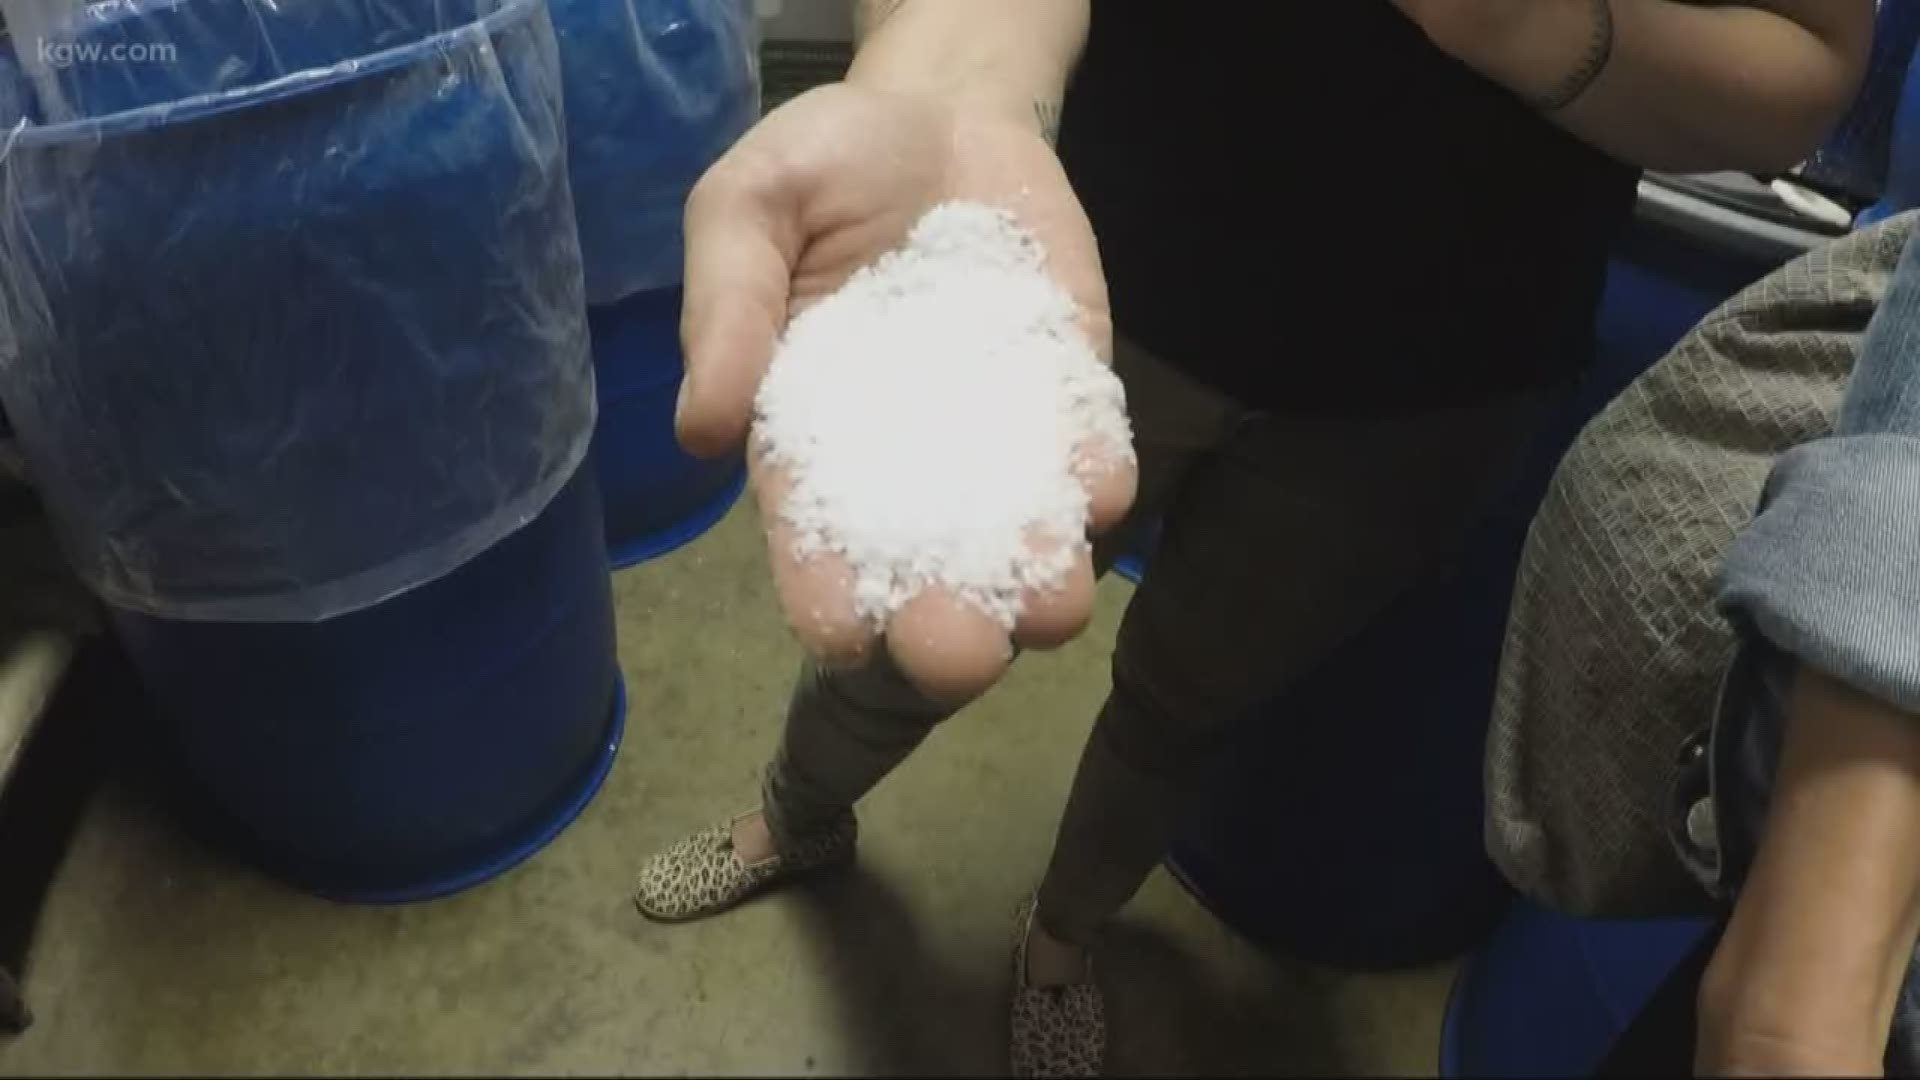 KGW Sunrise anchor Nina Mehlhaf takes a tour of Jacobsen Salt on the Oregon Coast and learns about the extraction process.